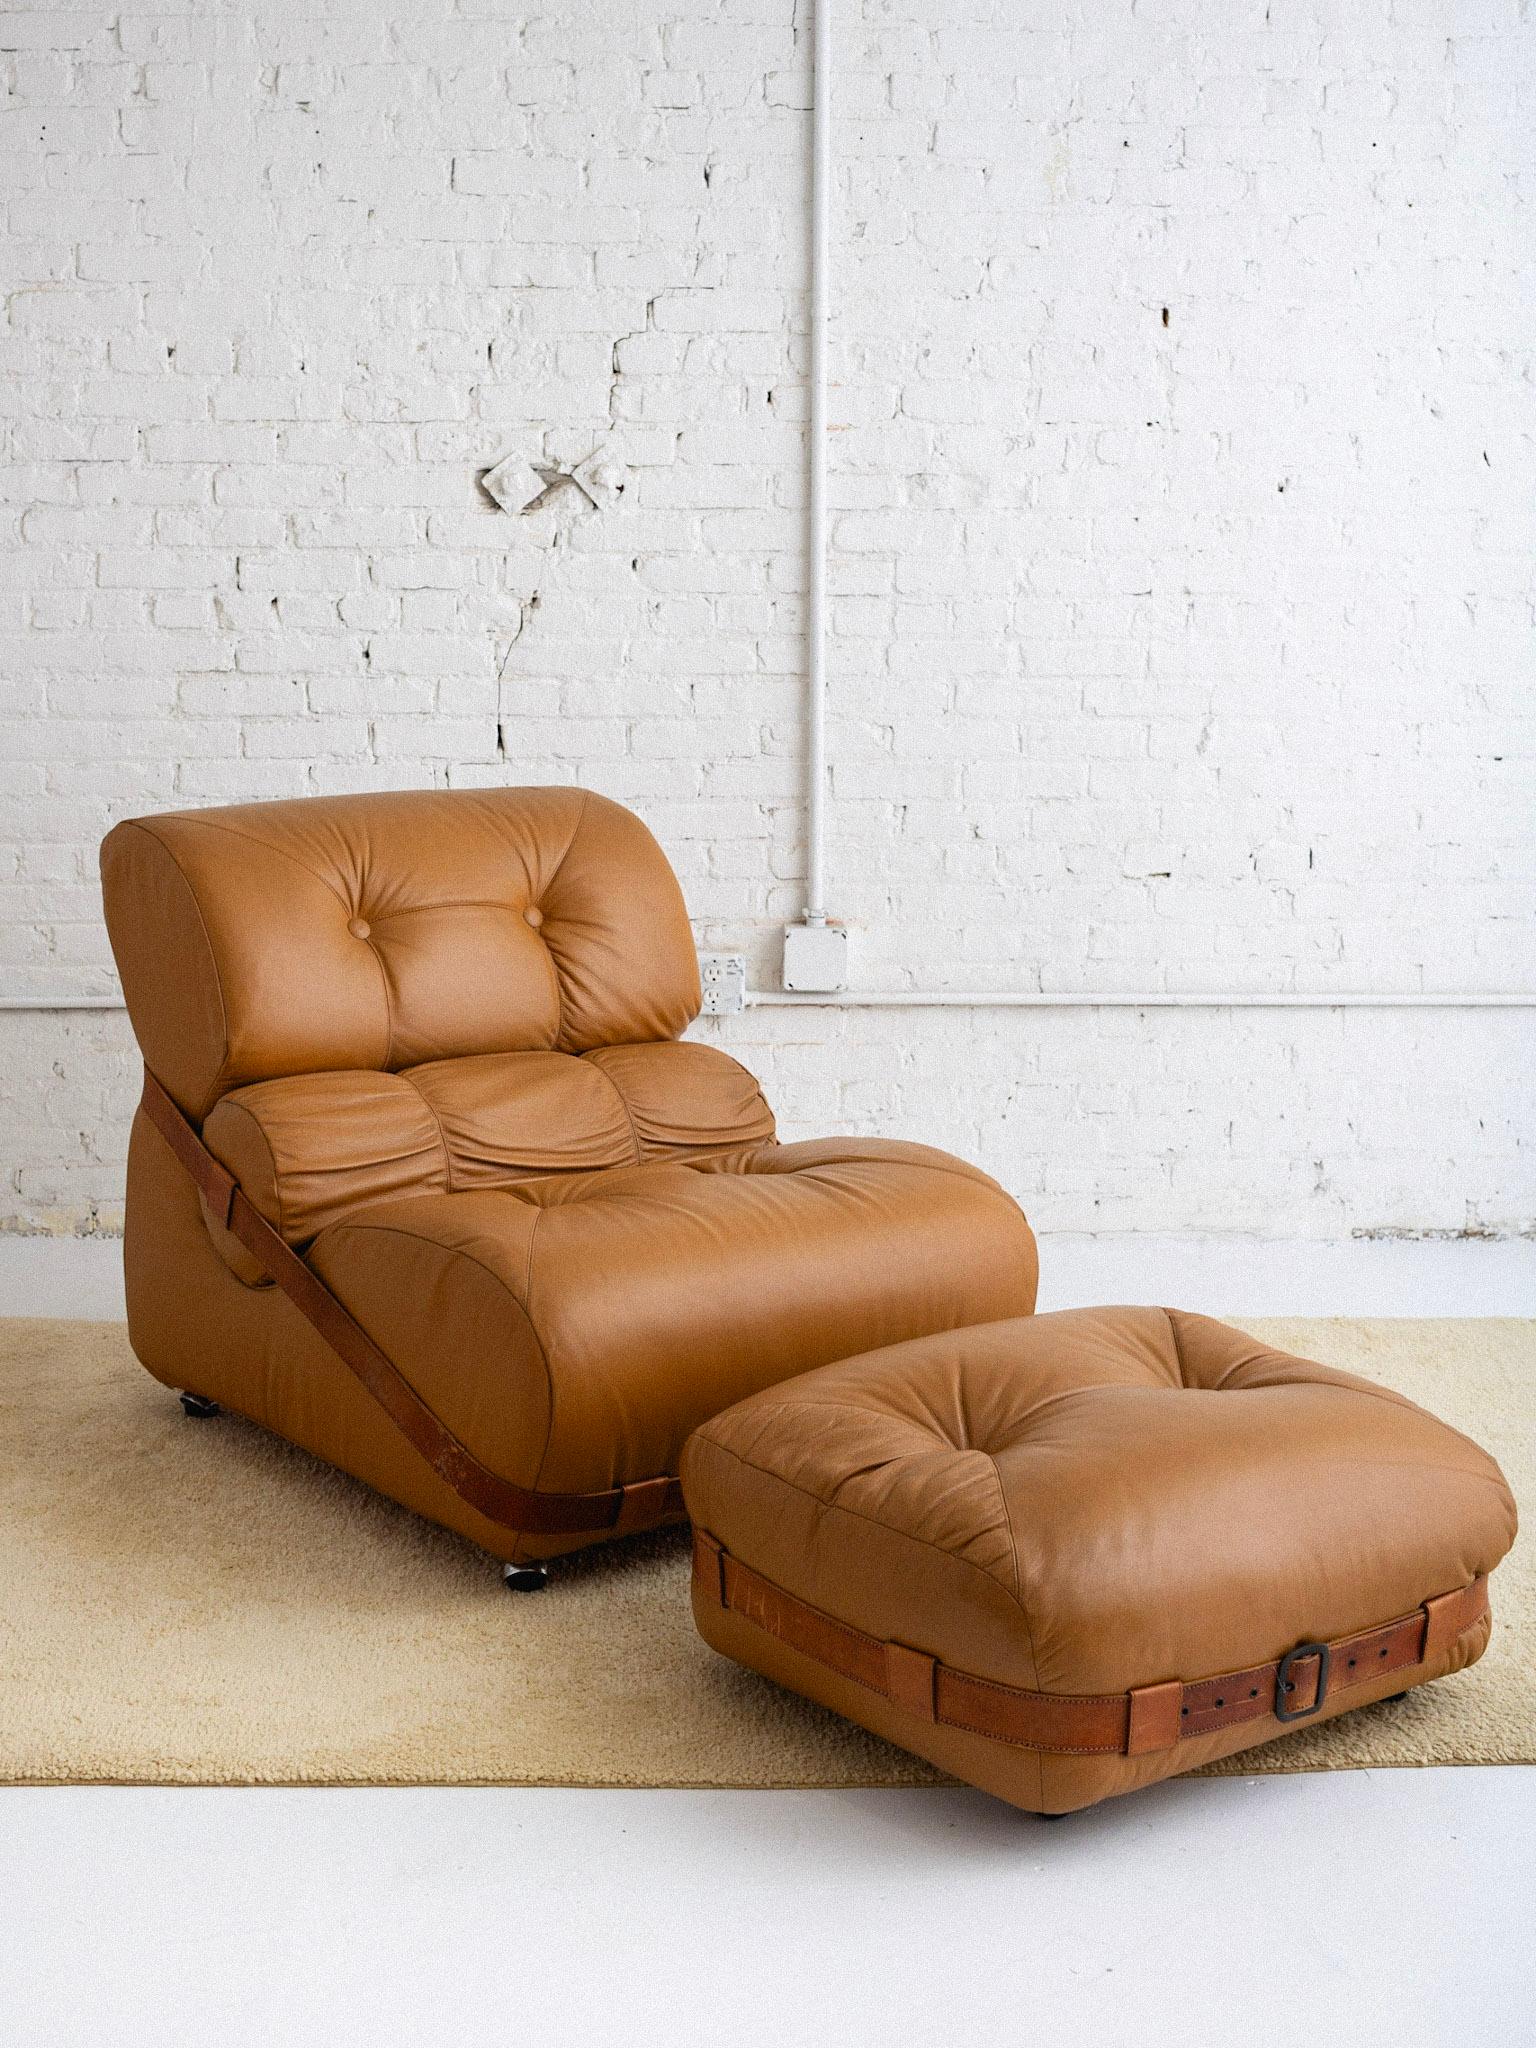 overstuffed leather chair and ottoman